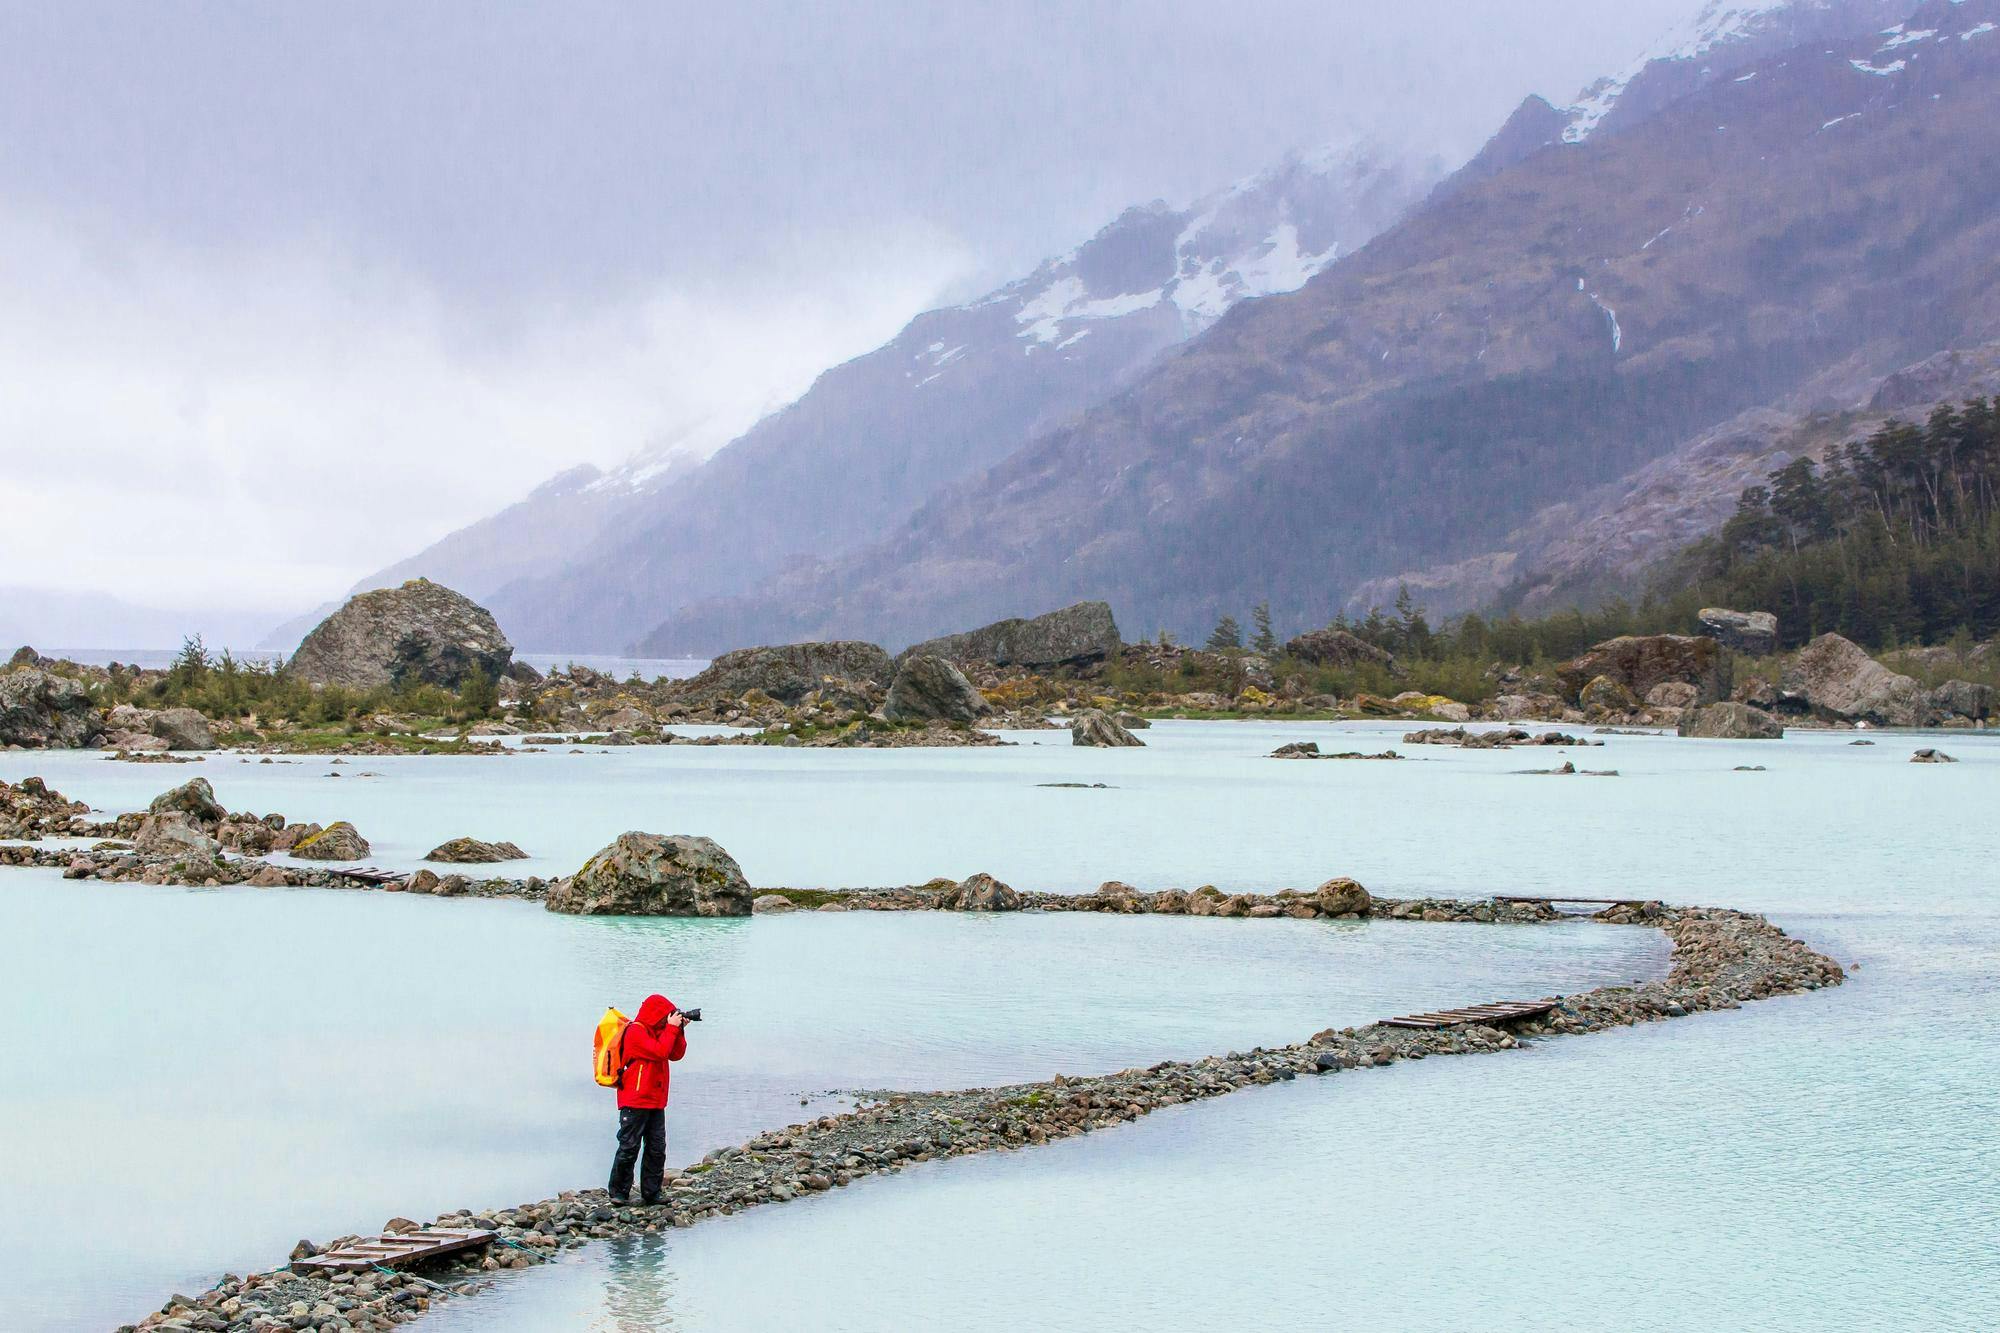 Hiker Carsten Peter on rocky path to the Bernal Glacier in Estero Las Montanas, Strait of Magellan, Patagonia, Chile.